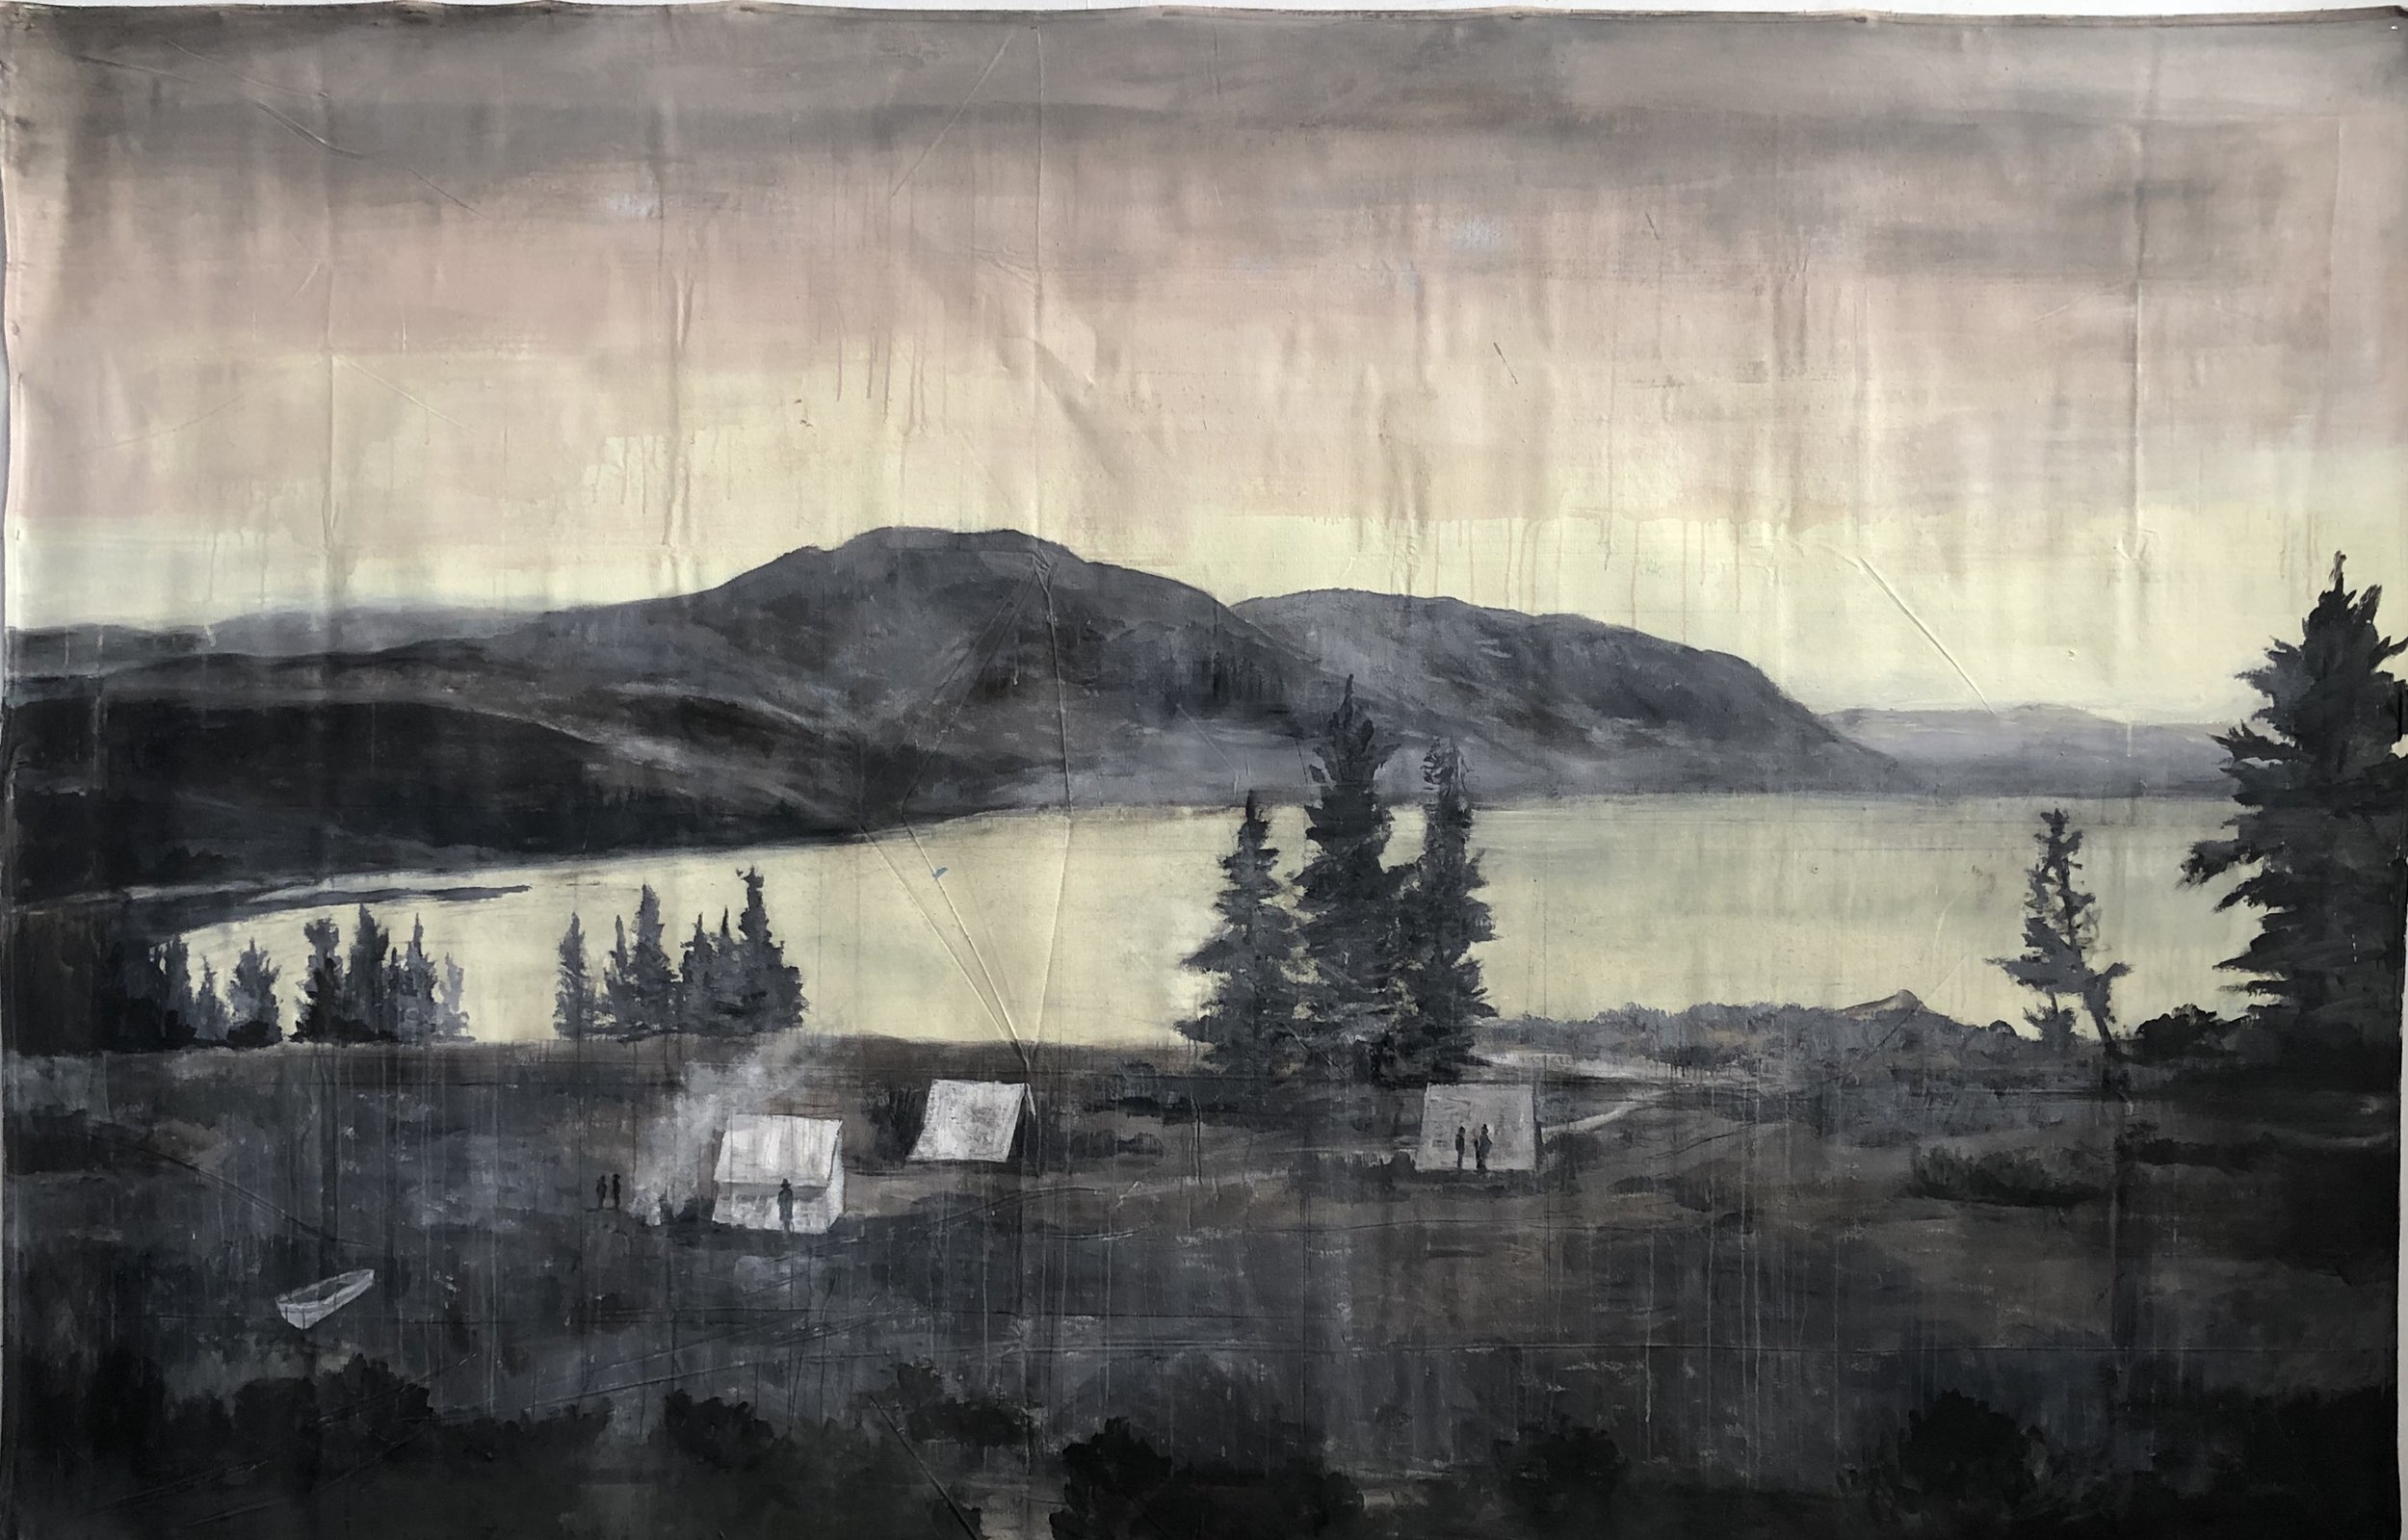    Encampment  , 2019  Oil on canvas  72 x 108 in. 